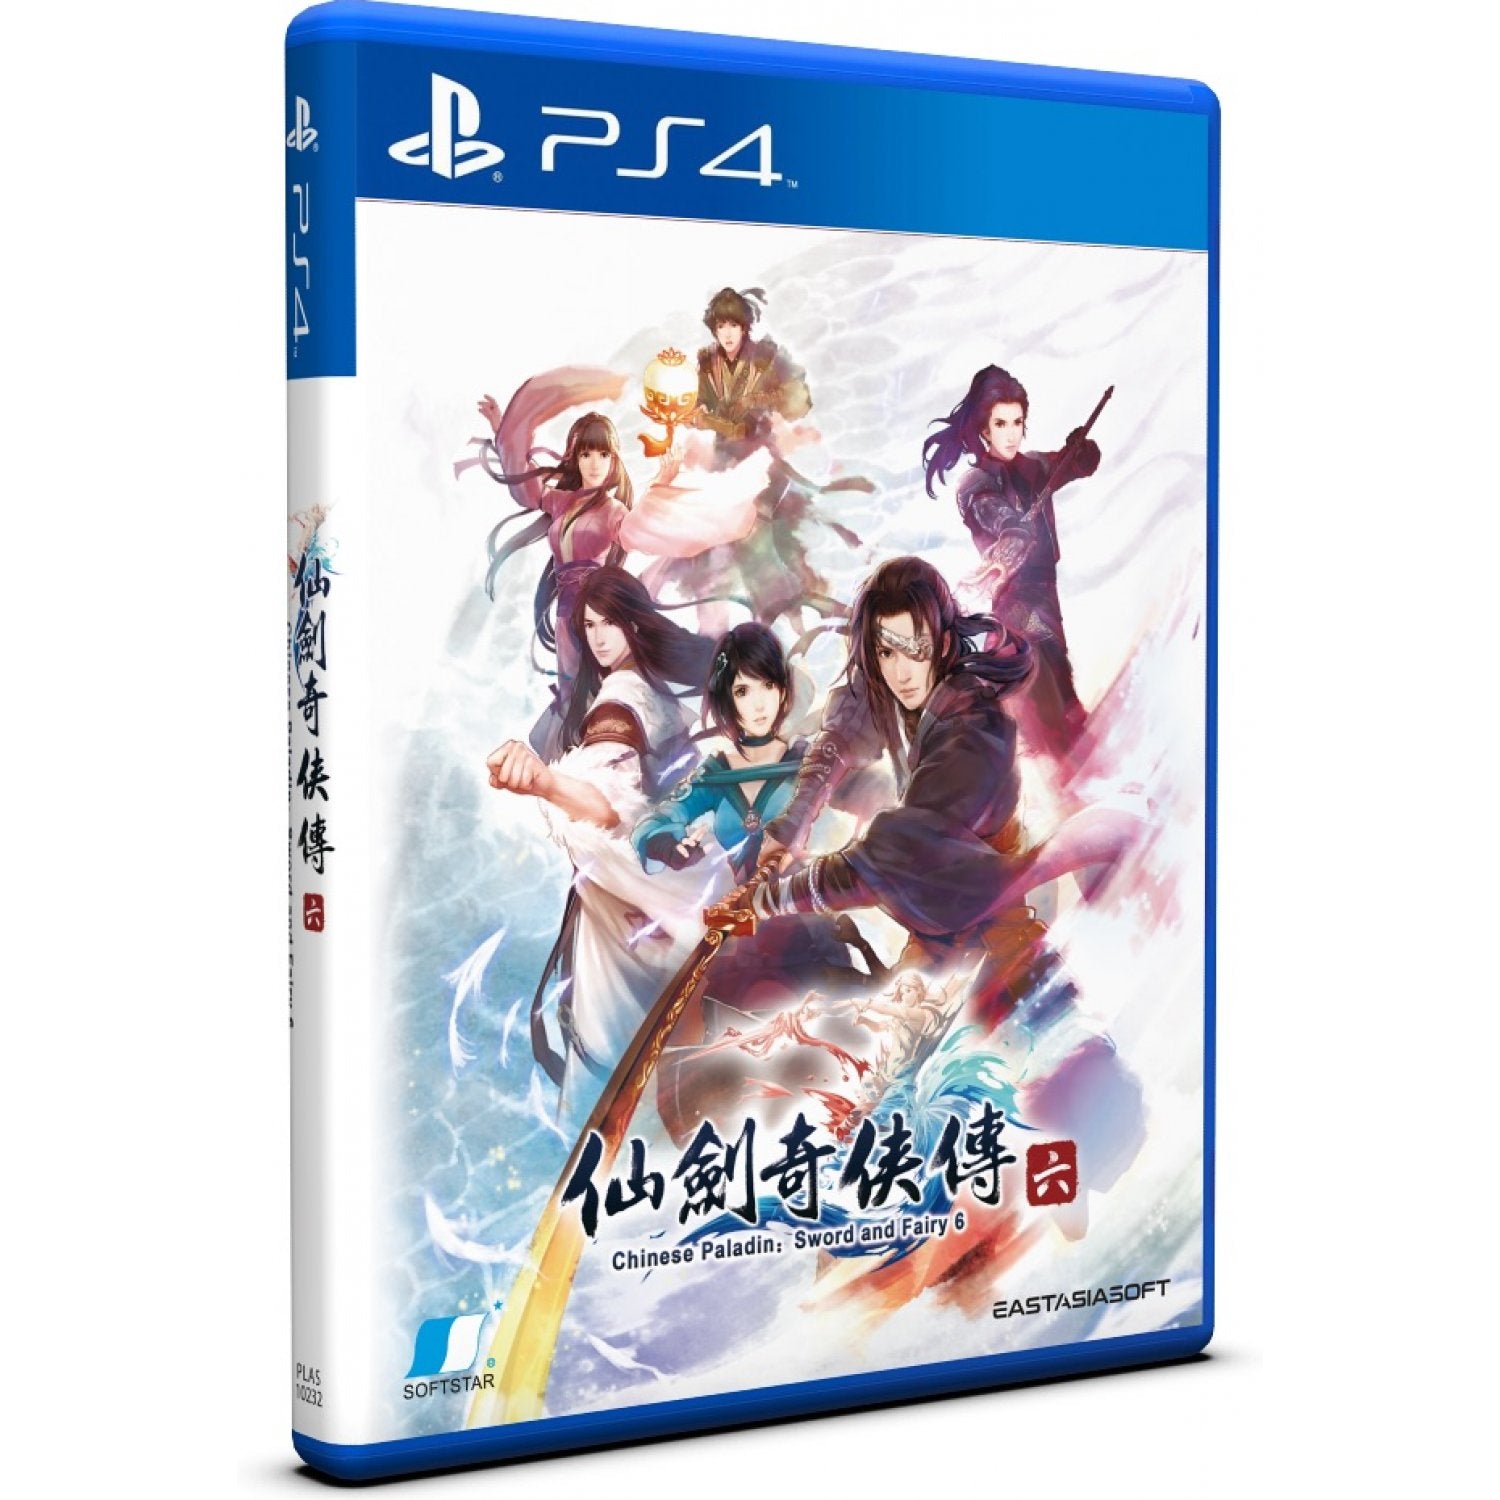 Sword & Fairy 6 - (PS4) PlayStation 4 (Asia Import) Video Games East Asia Soft   